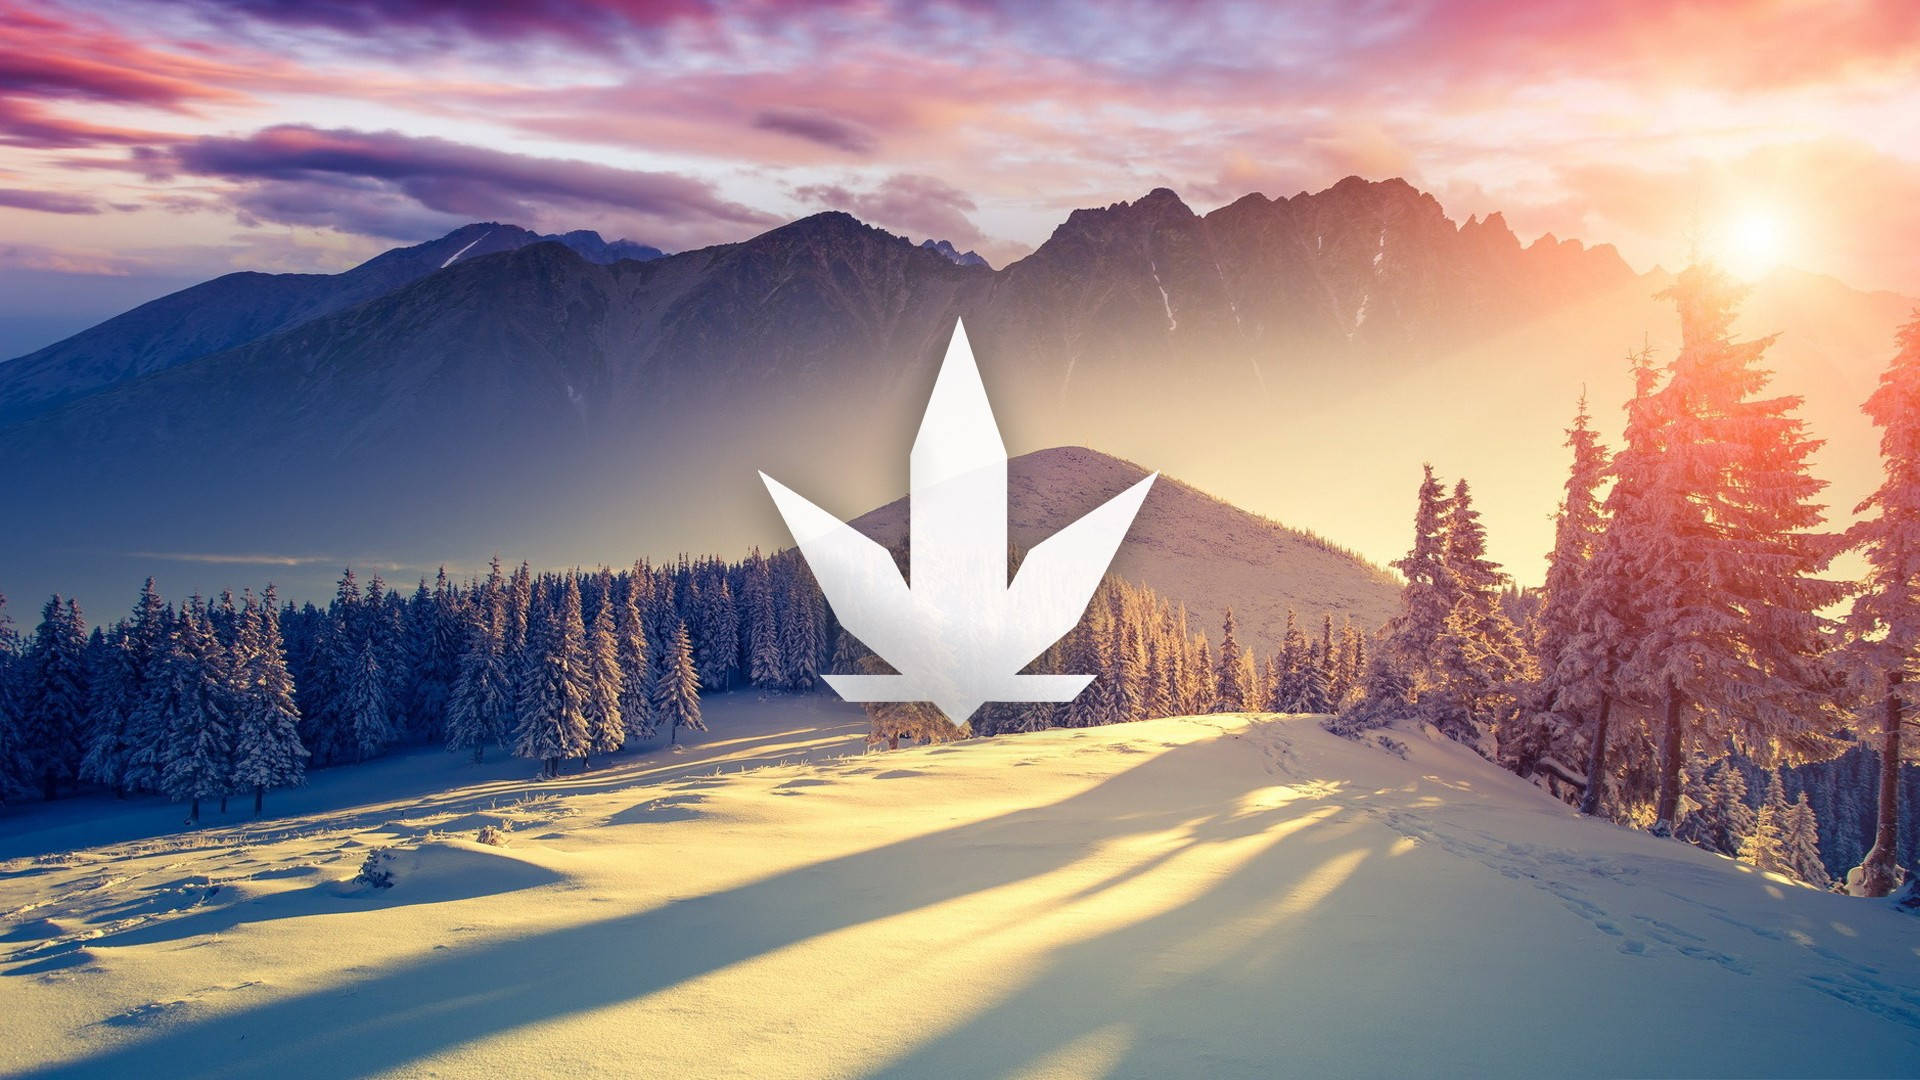 420 Weed On Snowy Landscape